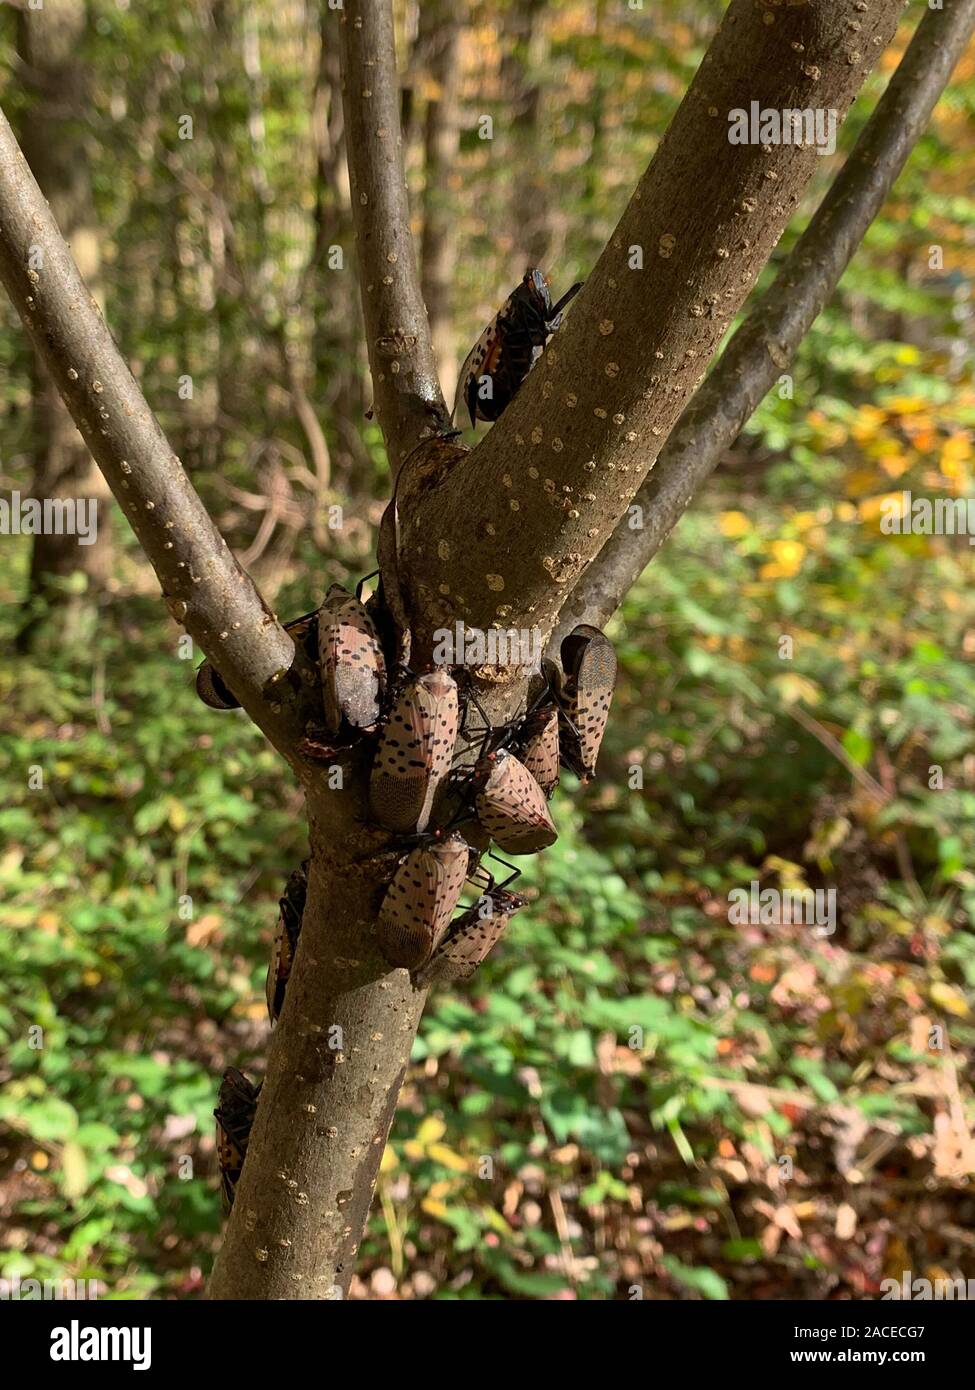 GROUP OF SPOTTED LANTERNFLY ADULTS (LYCORMA DELICATULA) ON TREE, LANCASTER, PENNSYLVANIA Stock Photo